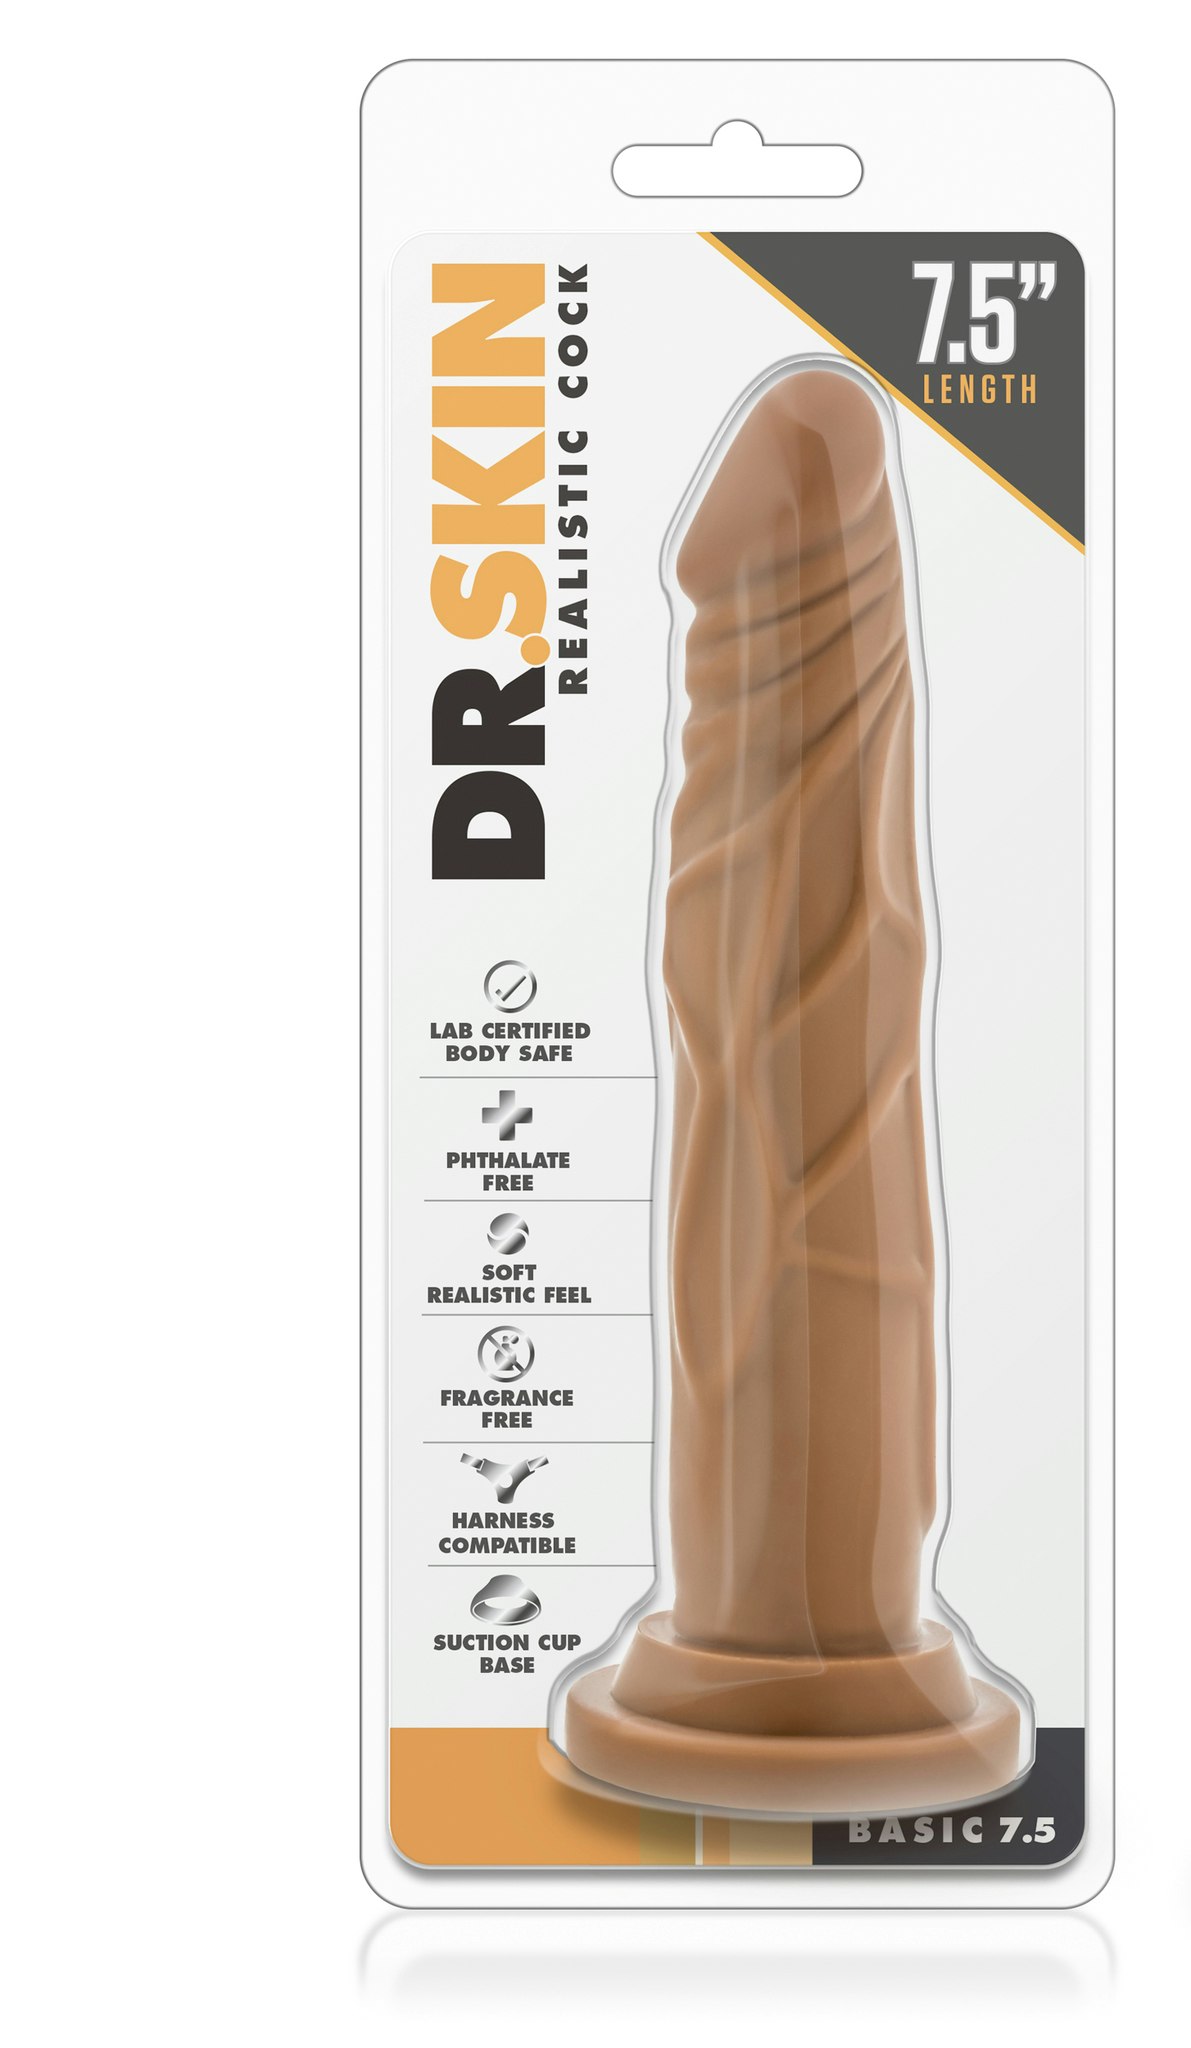 Dr. Skin - Realistic cock basic 7,5